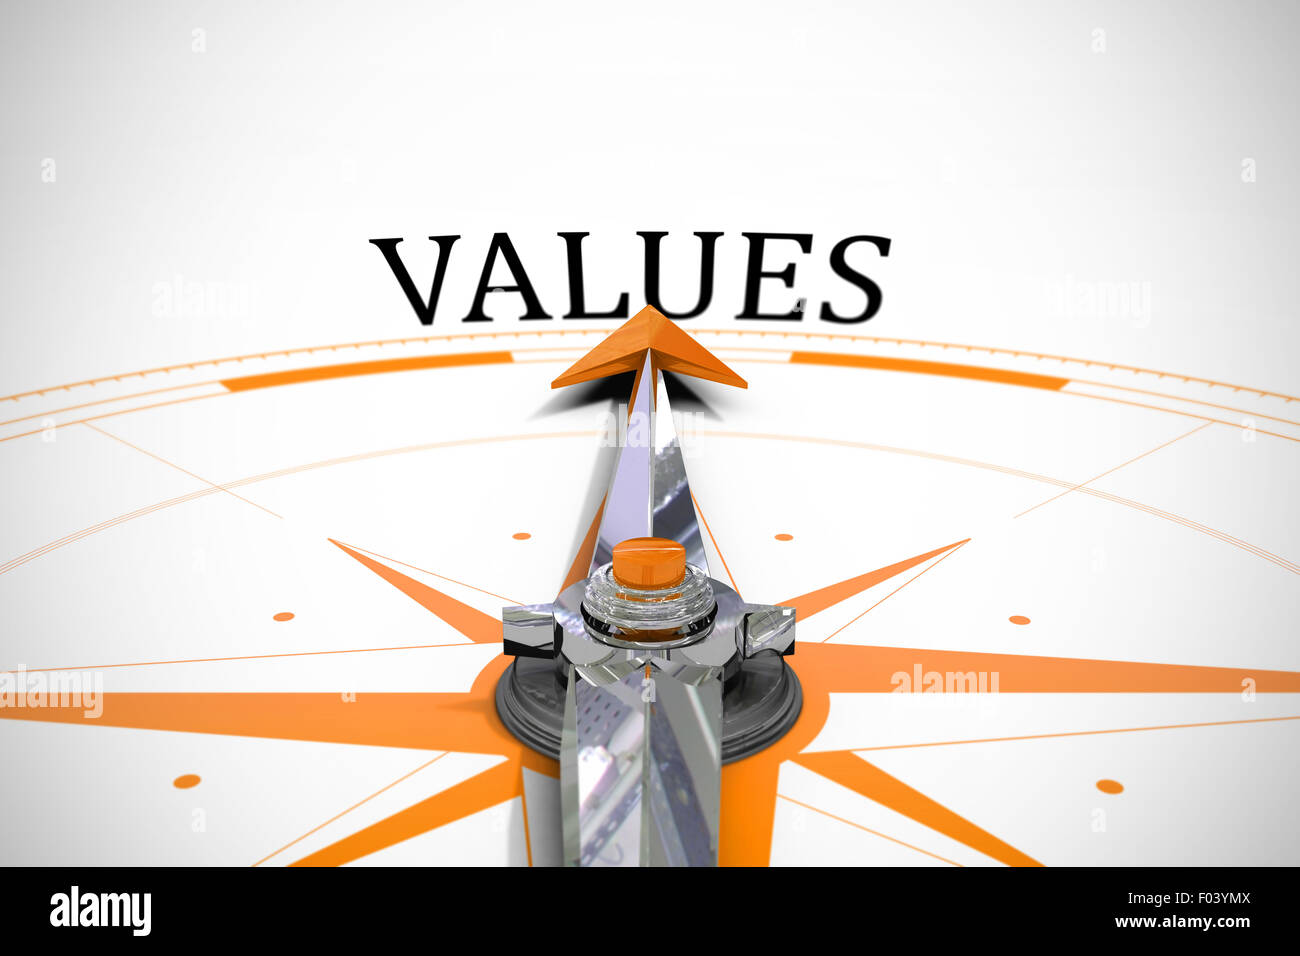 Values against compass Stock Photo